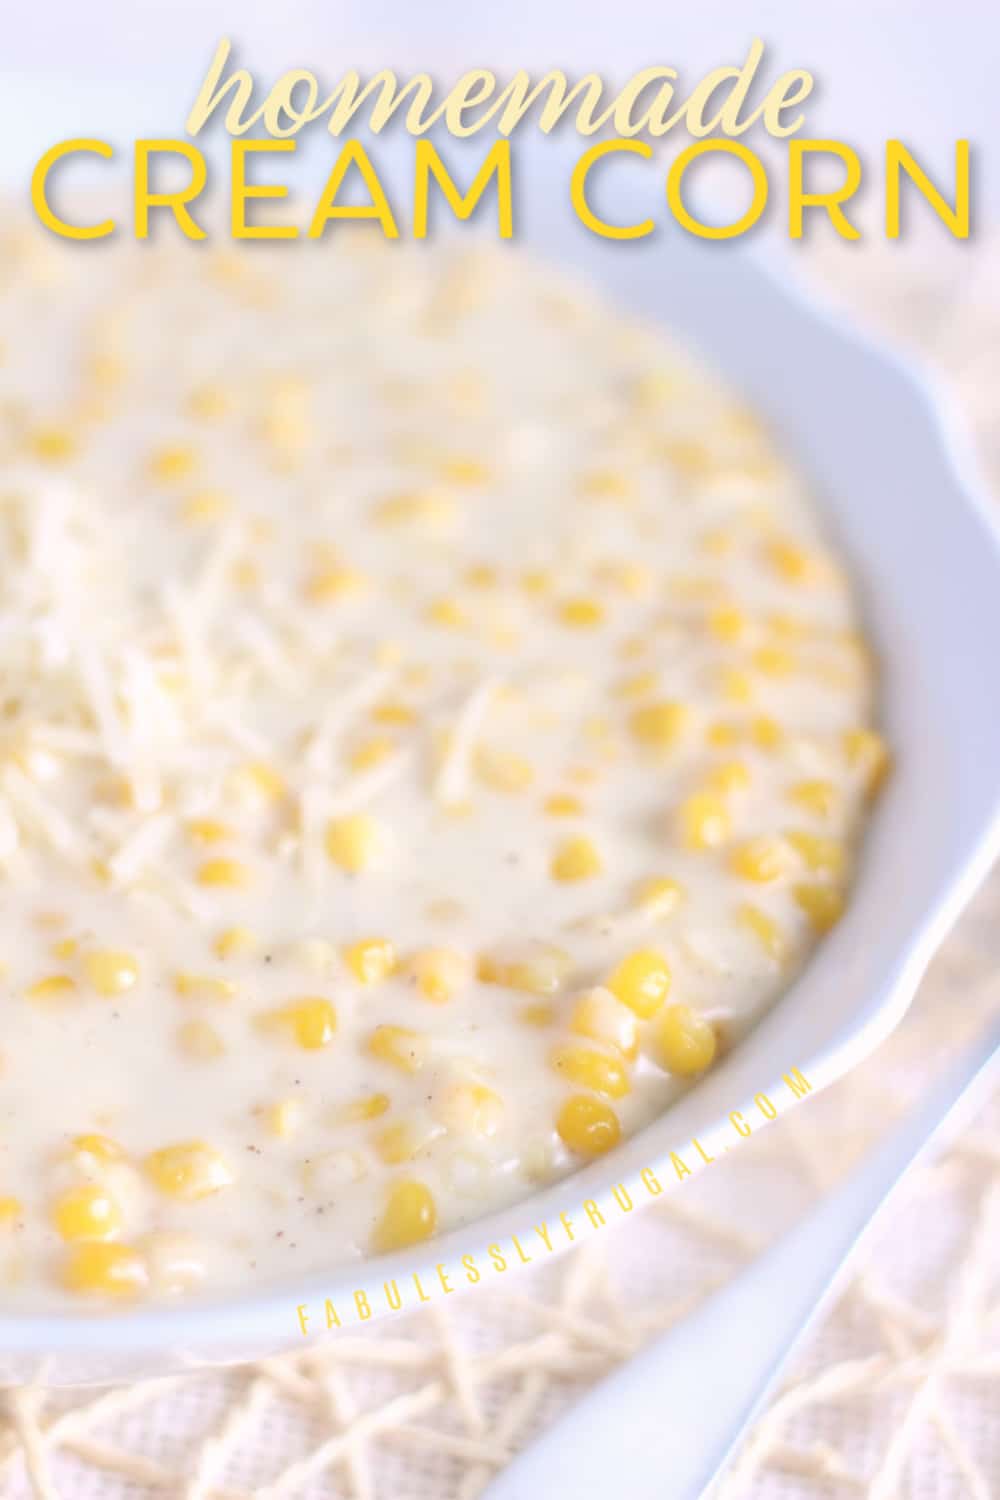 Homemade cream corn topped with parmesan